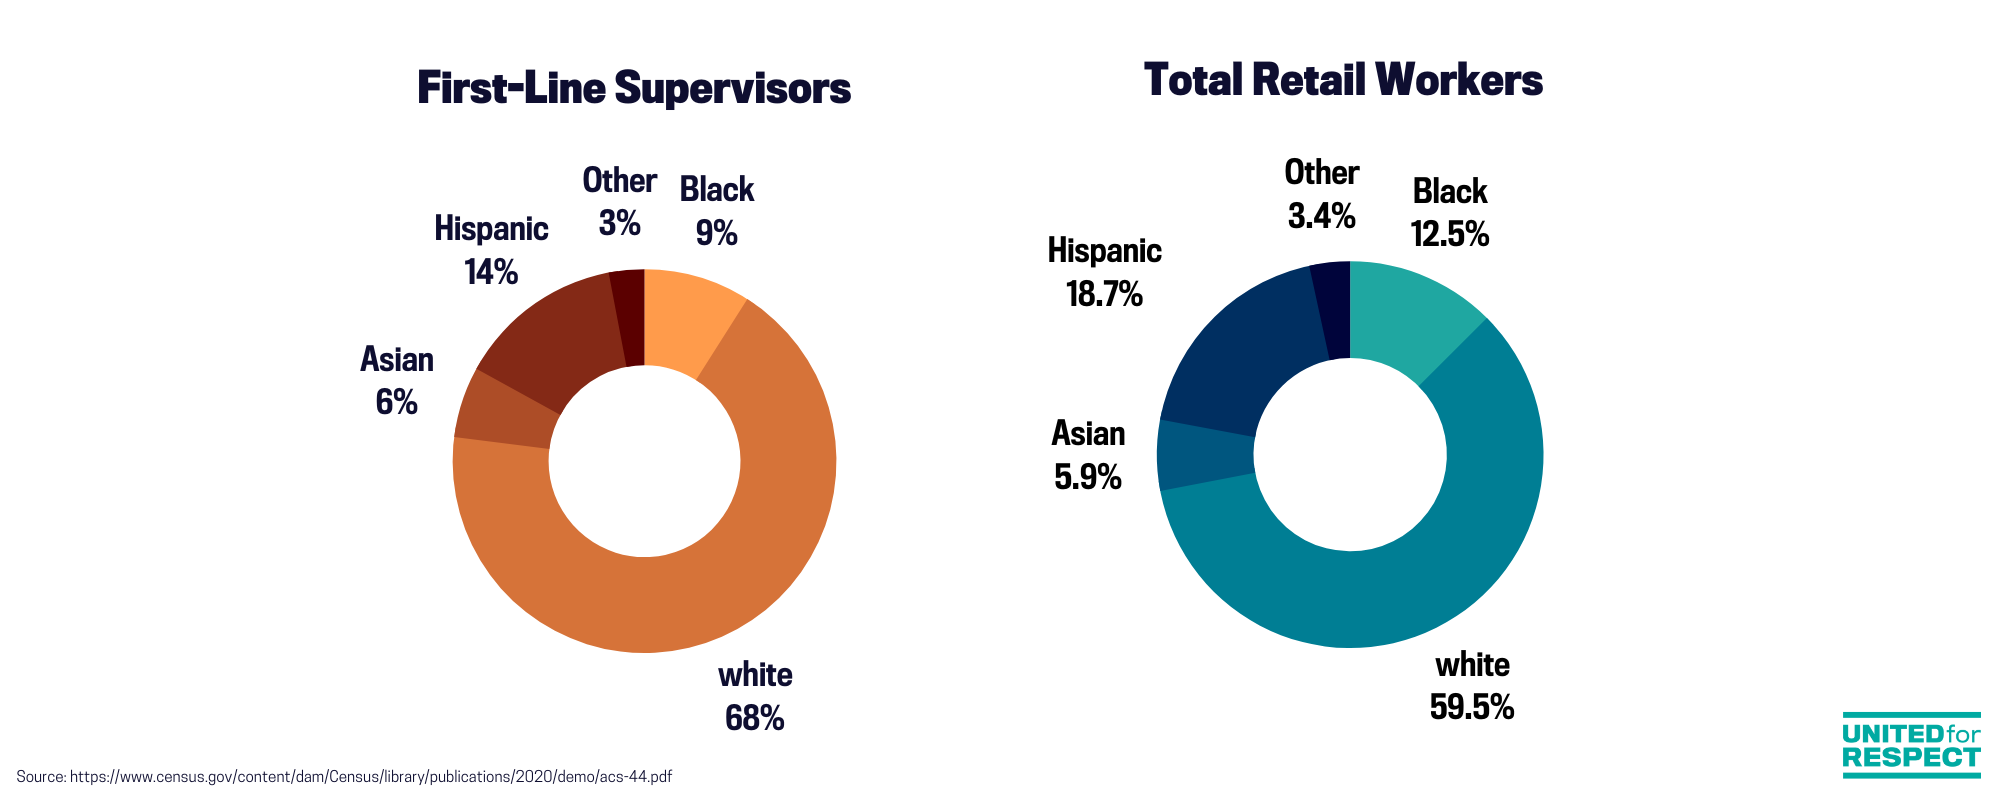 A pie chart breaks down the racial disparity in retail between total retail workers (59.5% white) and first-line supervisors (68% white).